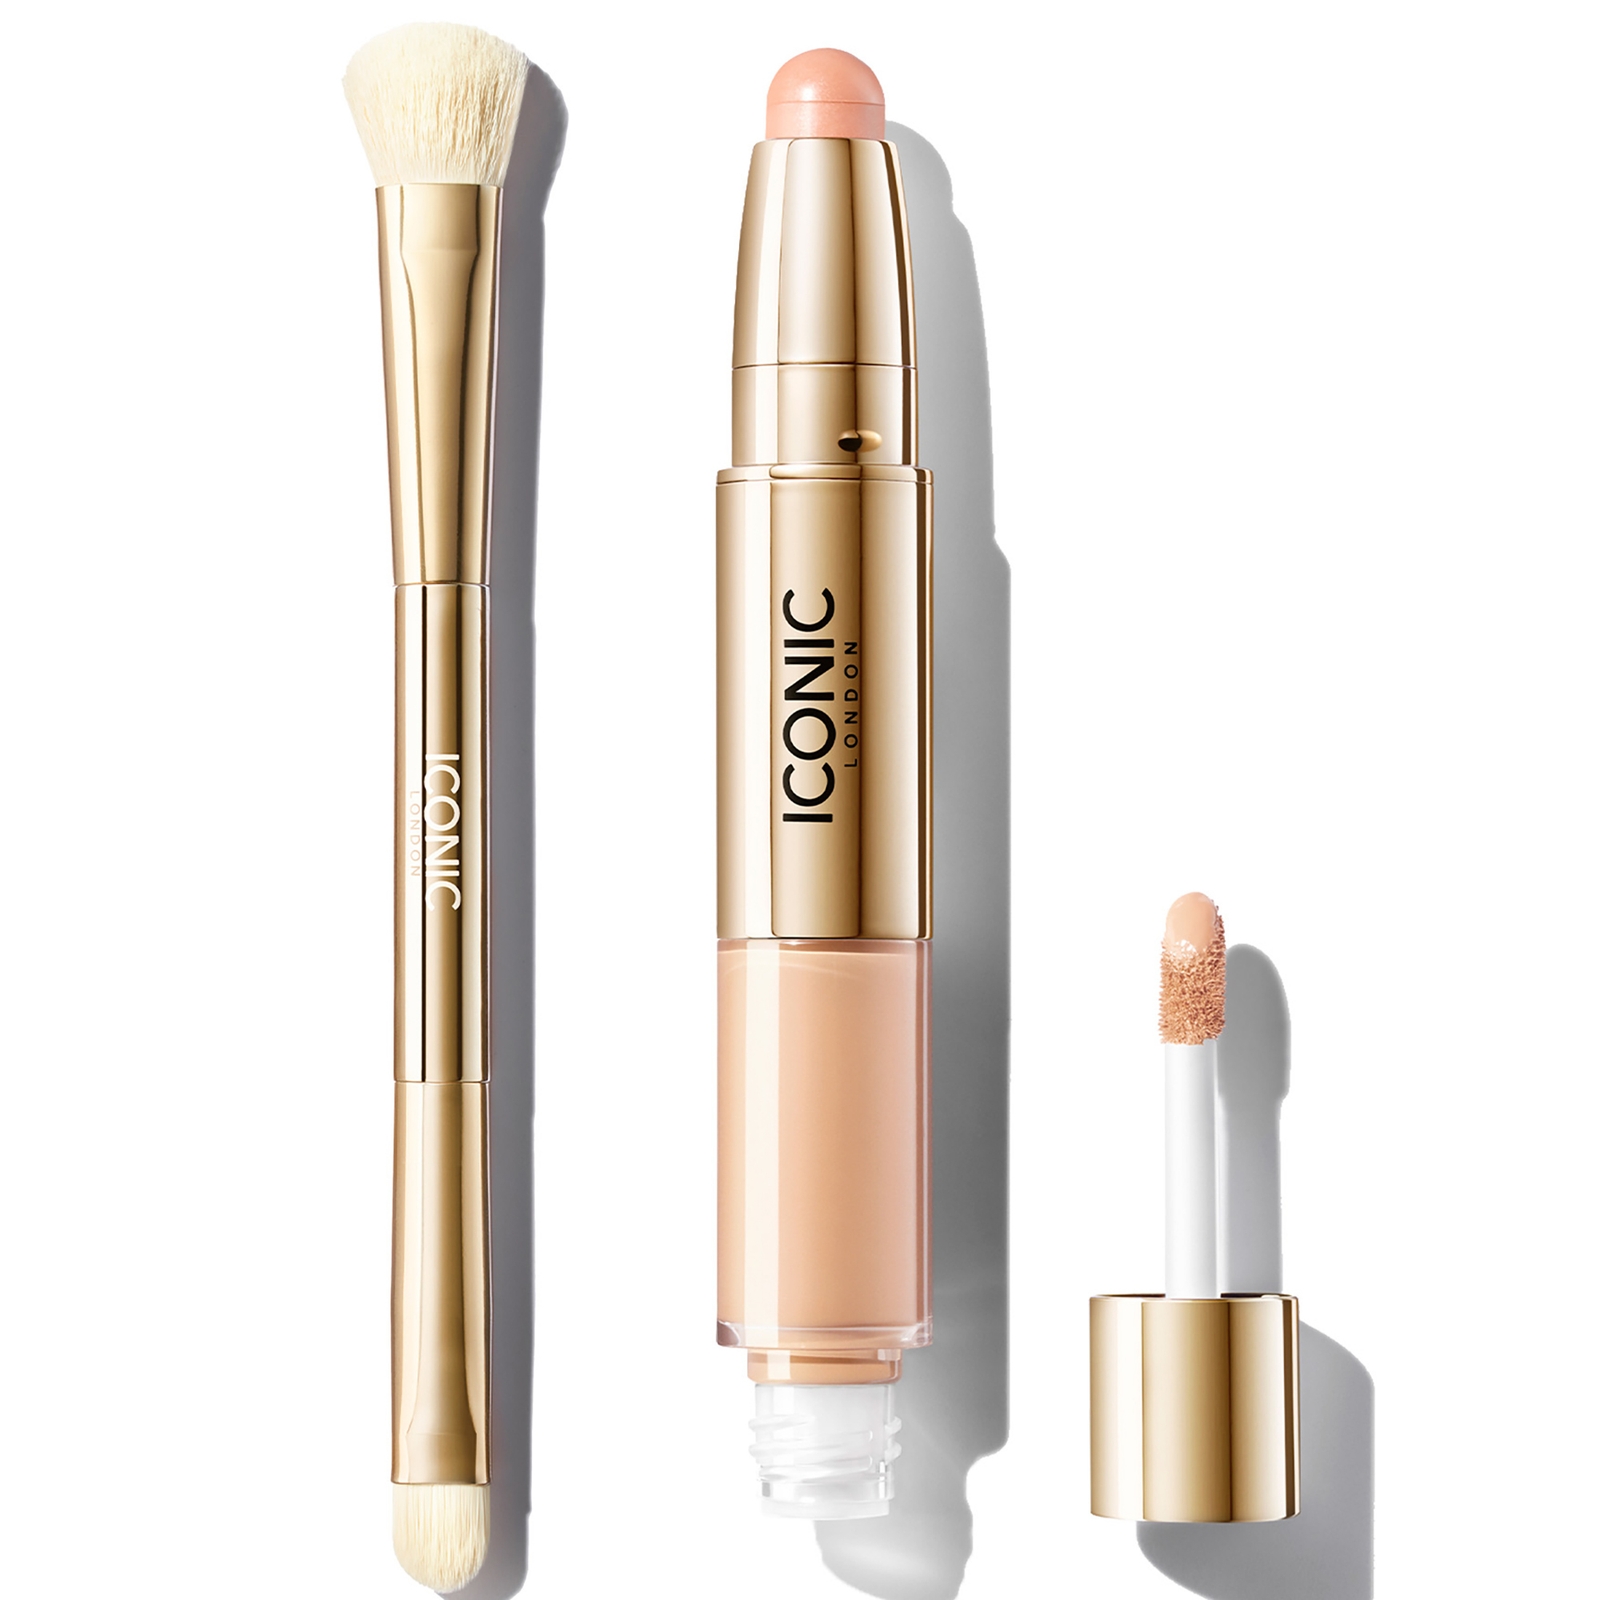 Iconic London Radiant Concealer And Brush Bundle (various Shades) - Cool Fair